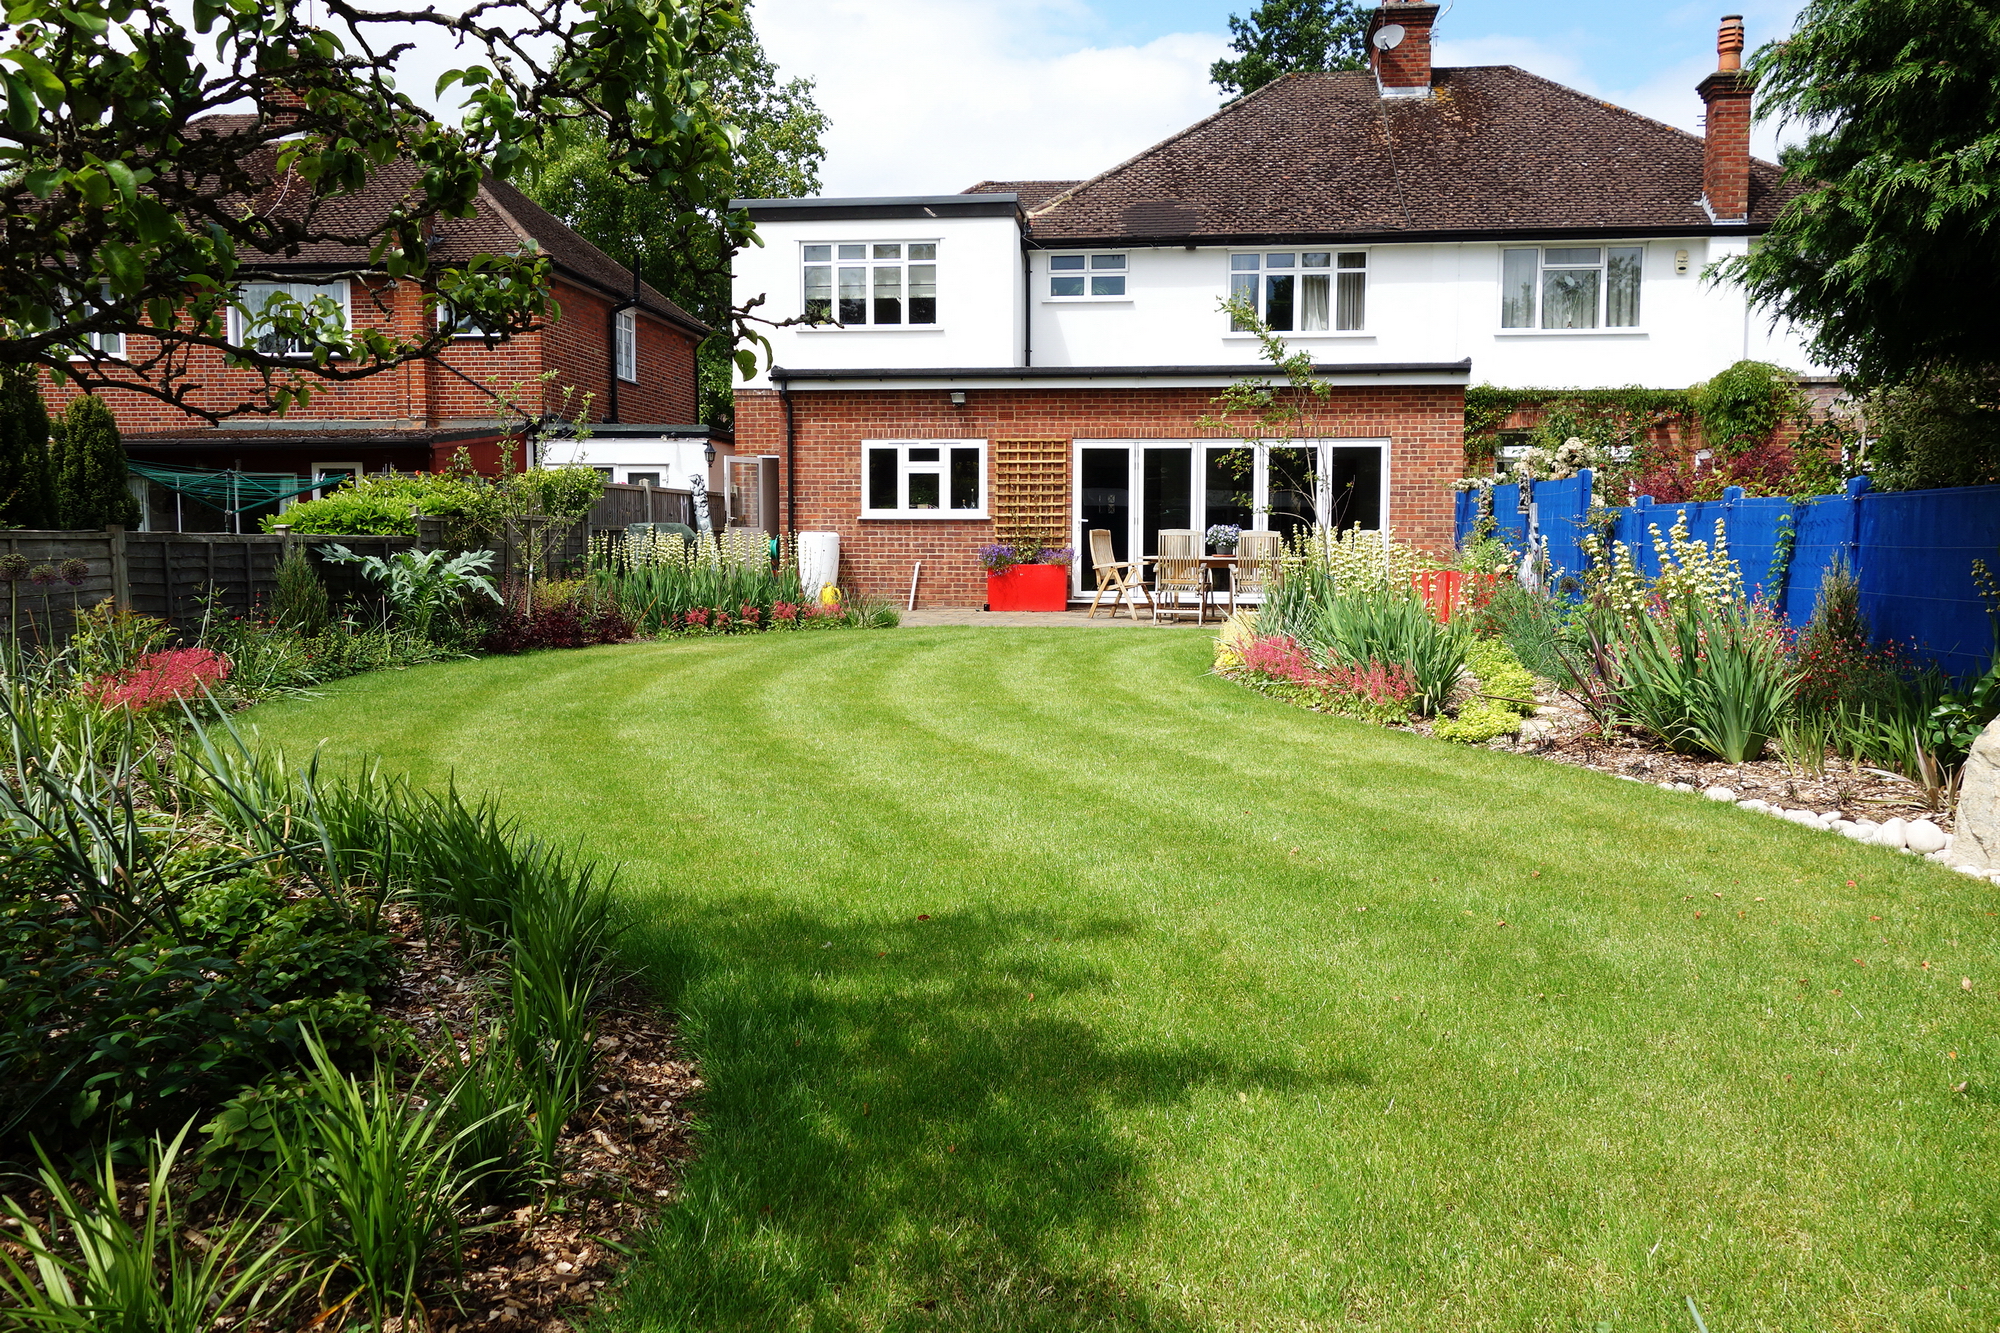 Garden planting design for Ickenham: Sweeping lawn and lots of colour is now in the garden